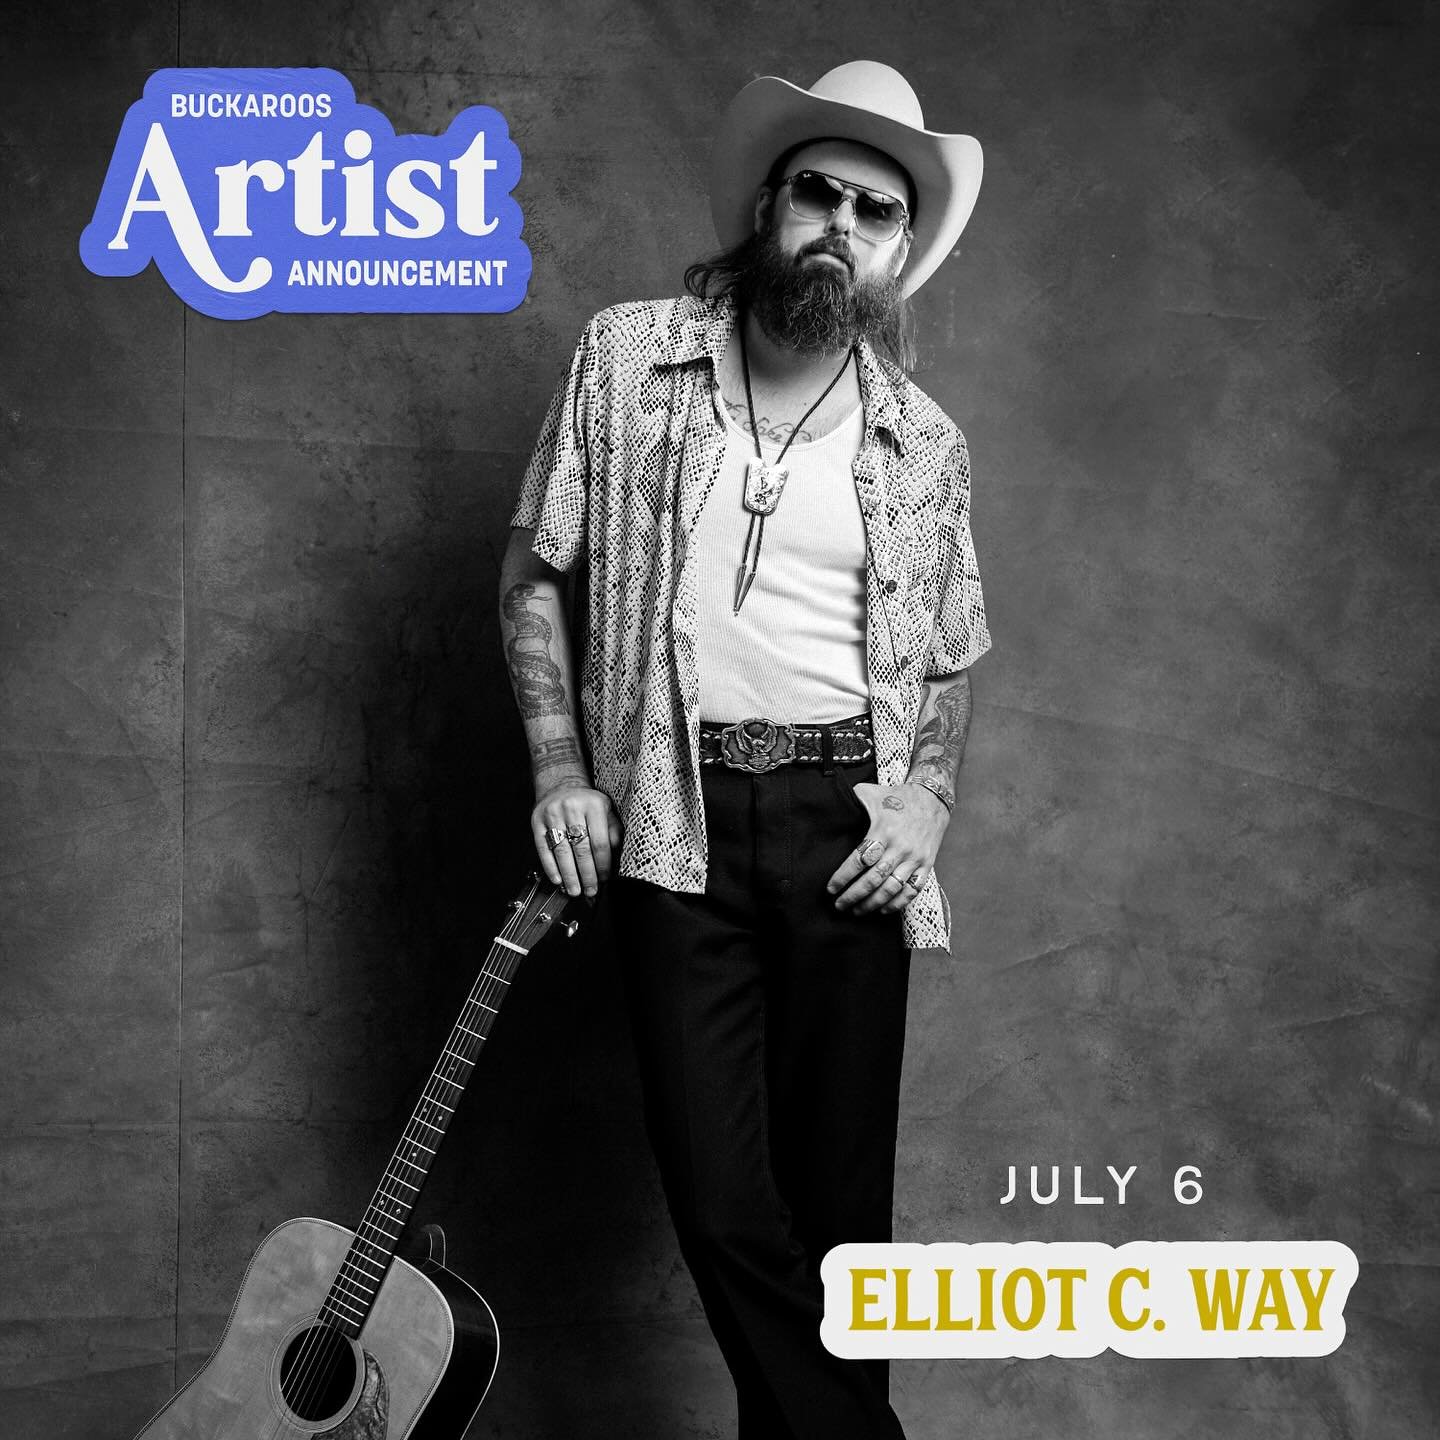 SATURDAY JULY 6 🐎

Buckaroos is proud to announce North Country Collective&rsquo;s (@northcountrycollective) very own, Elliot C. Way July 6, 2024! Labelled an outlaw crooner, Elliot&rsquo;s sound balances both the hardened and the tender, writing so